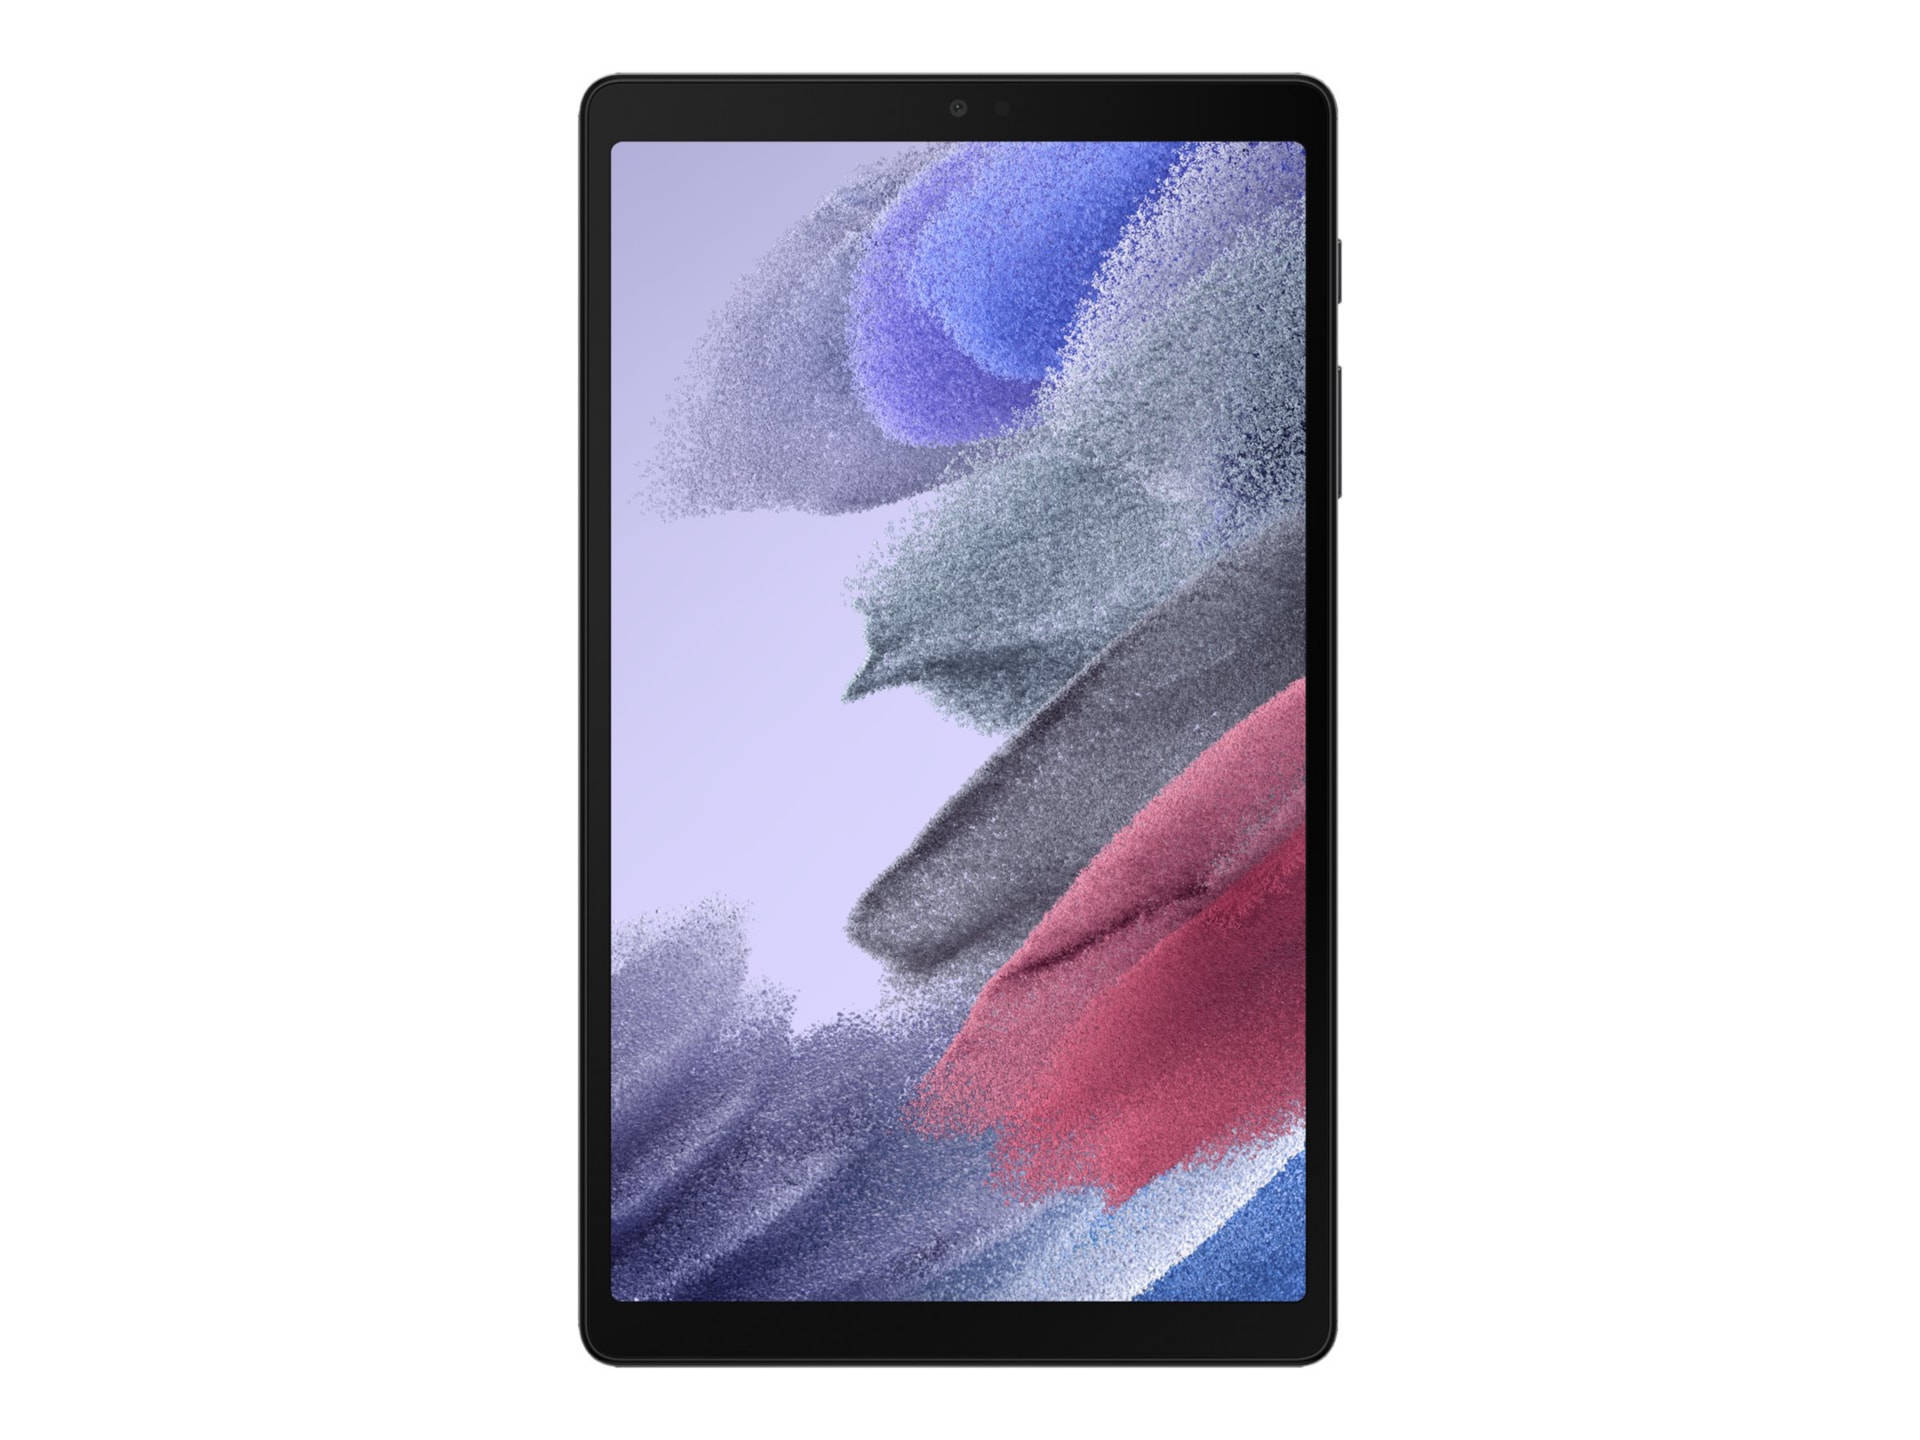 Samsung Galaxy Tab A7 Lite - tablette - Android - 32 Go - 8.7"